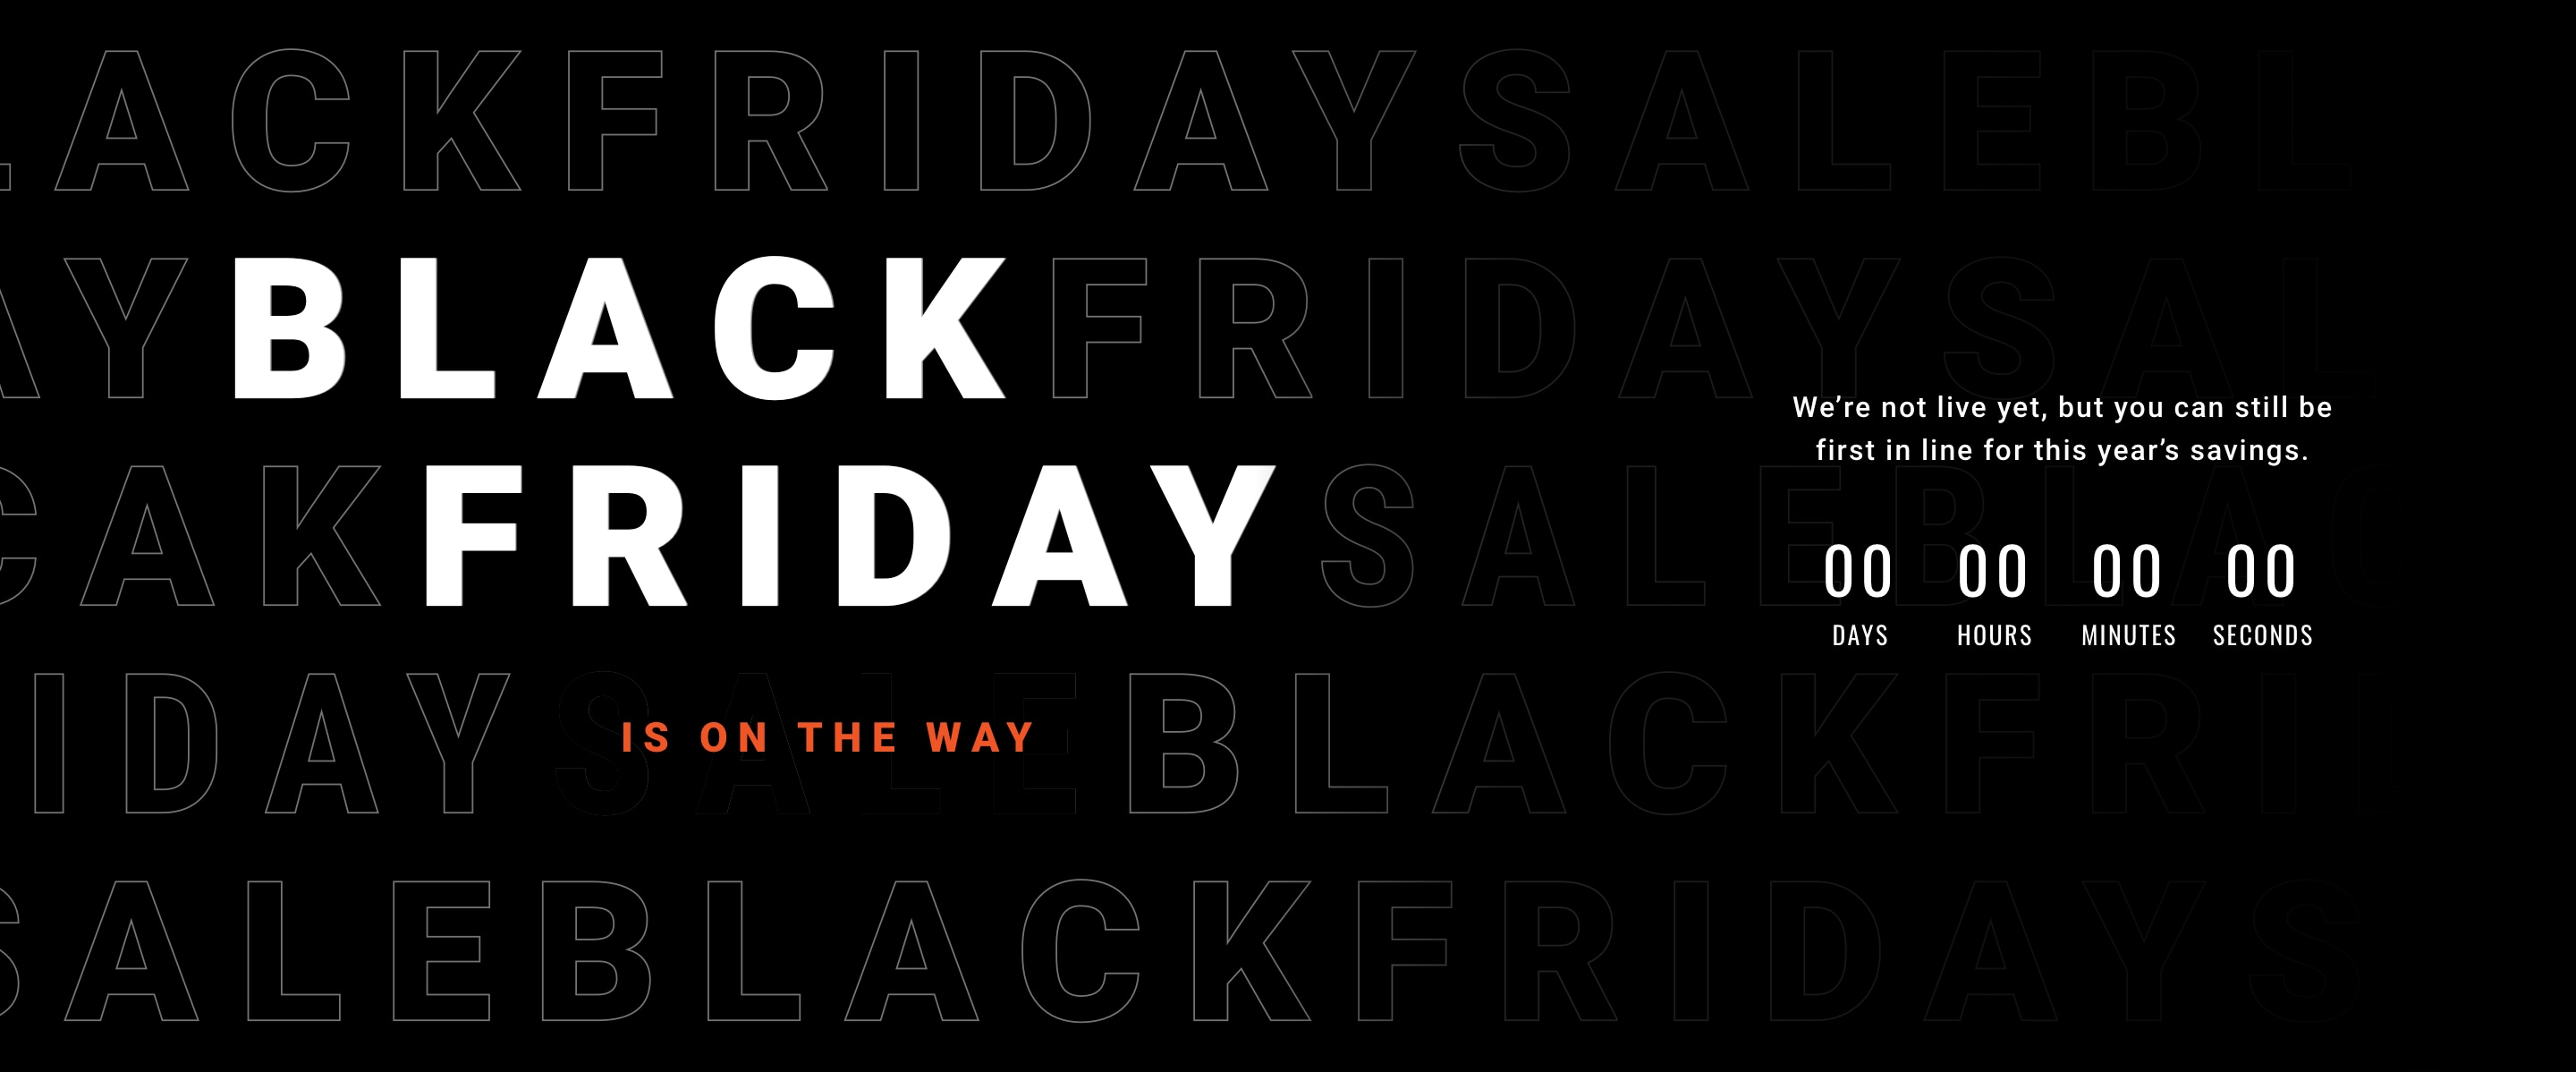 OUR BLACK FRIDAY SALE IS GOING ON NOW! 25% OFF BLACK FRIDAY